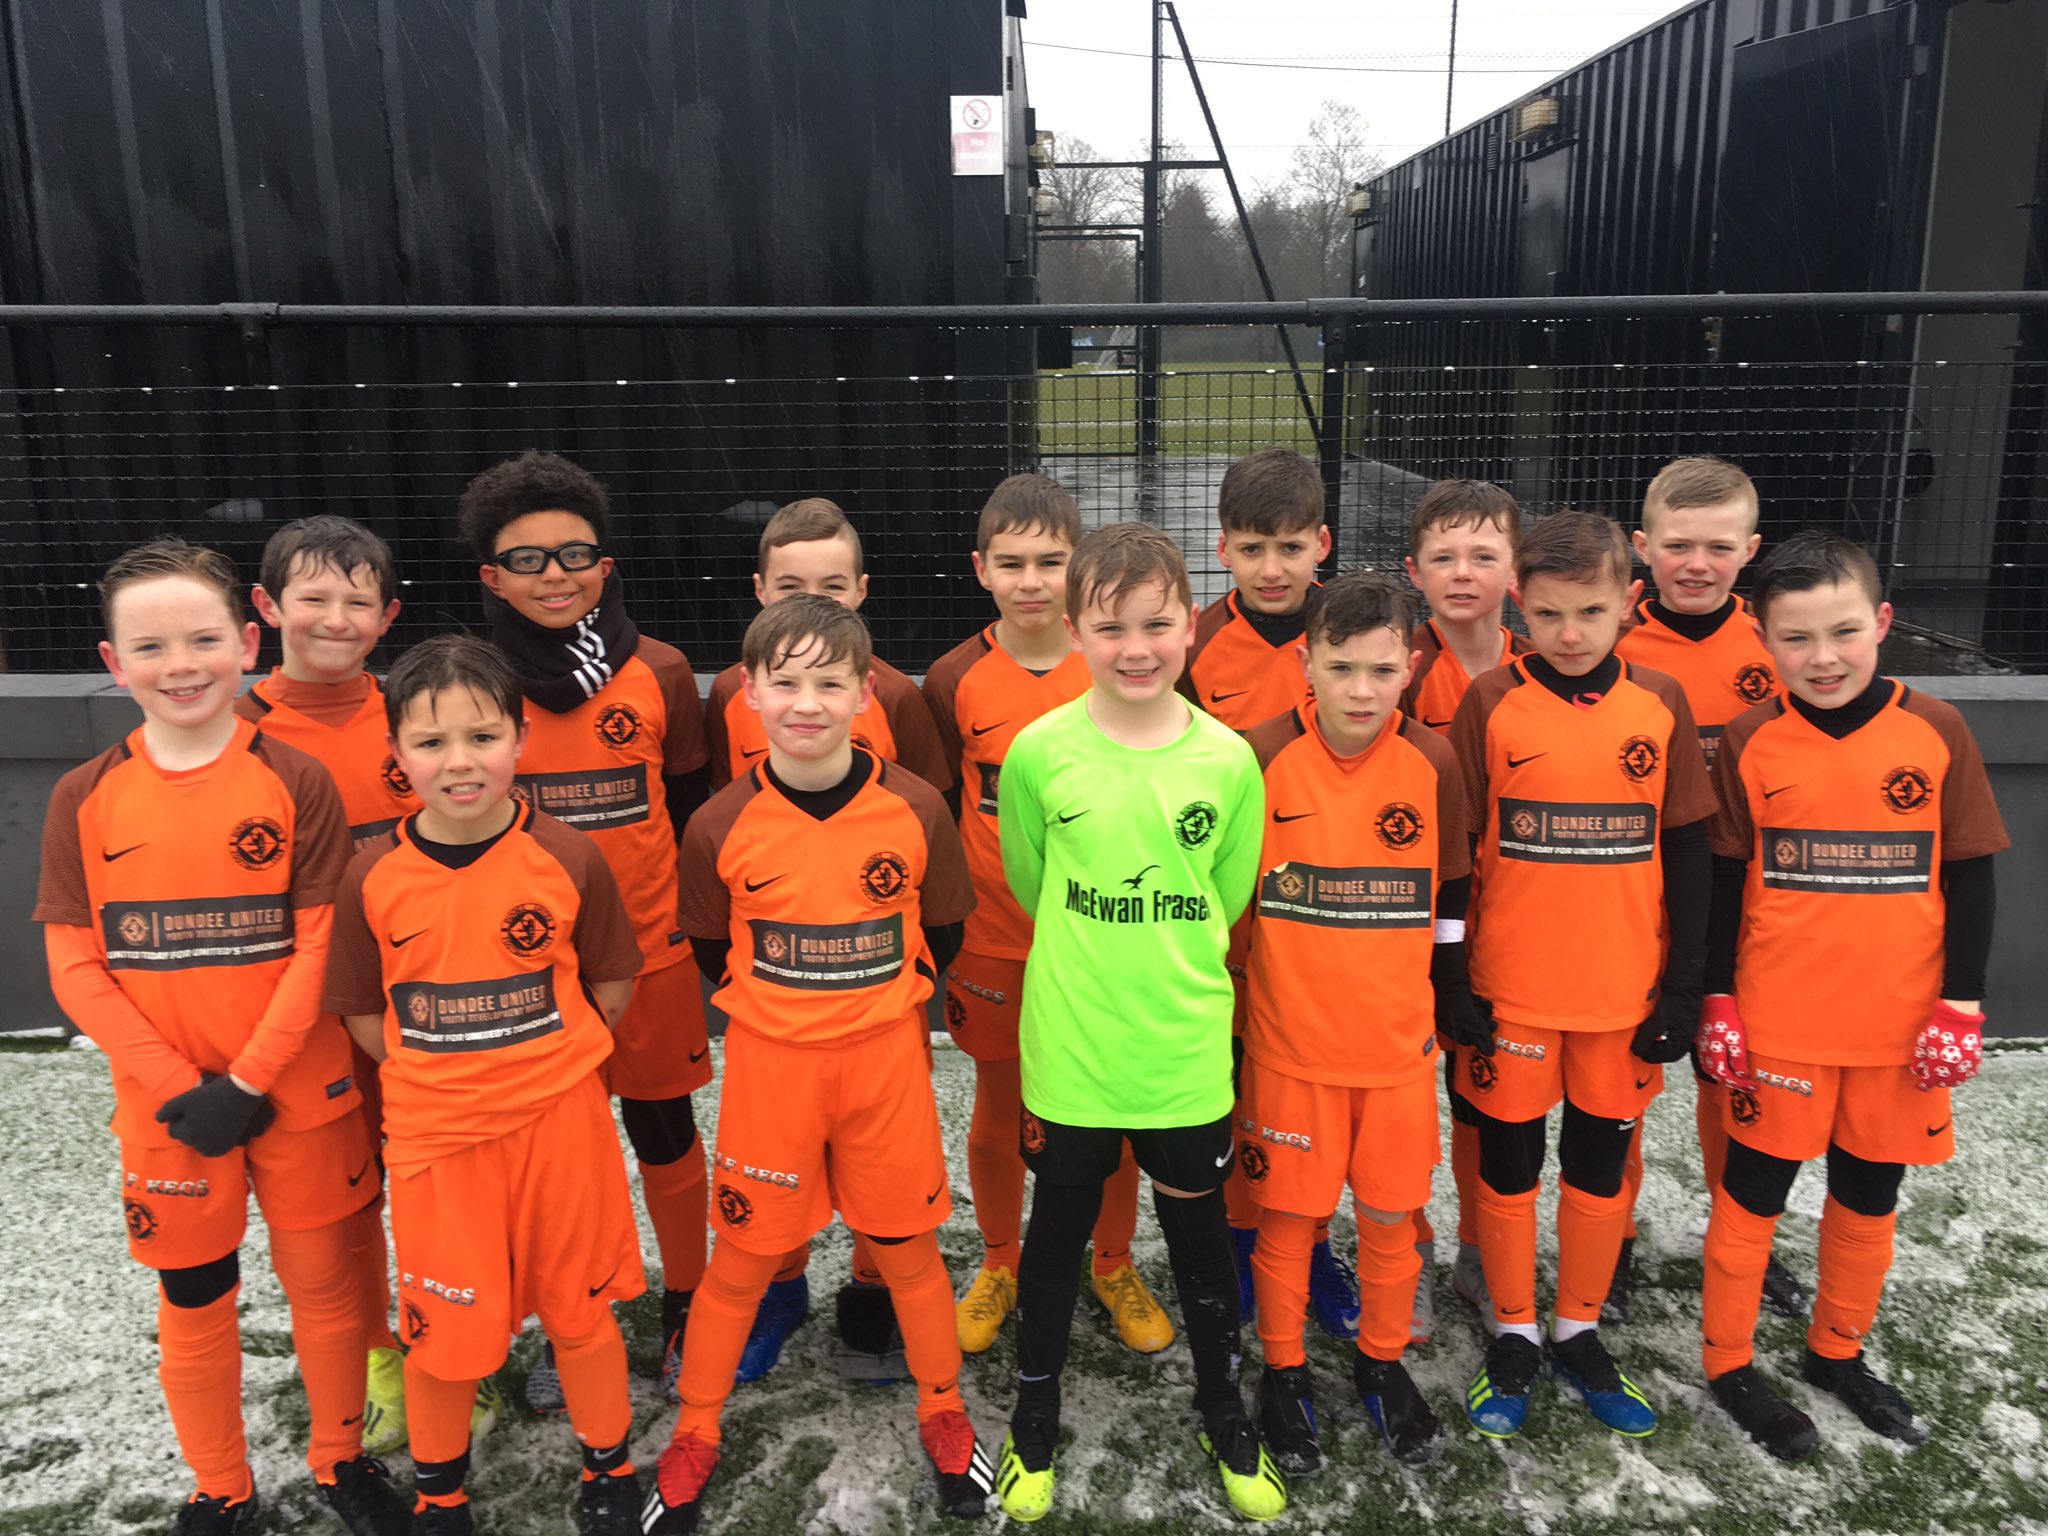 Dundee United FC Academy on Twitter: "UNDER 11s | A fantastic effort by our staff, parents and, most importantly, players to travel through to Paisley this morning for our games vs St